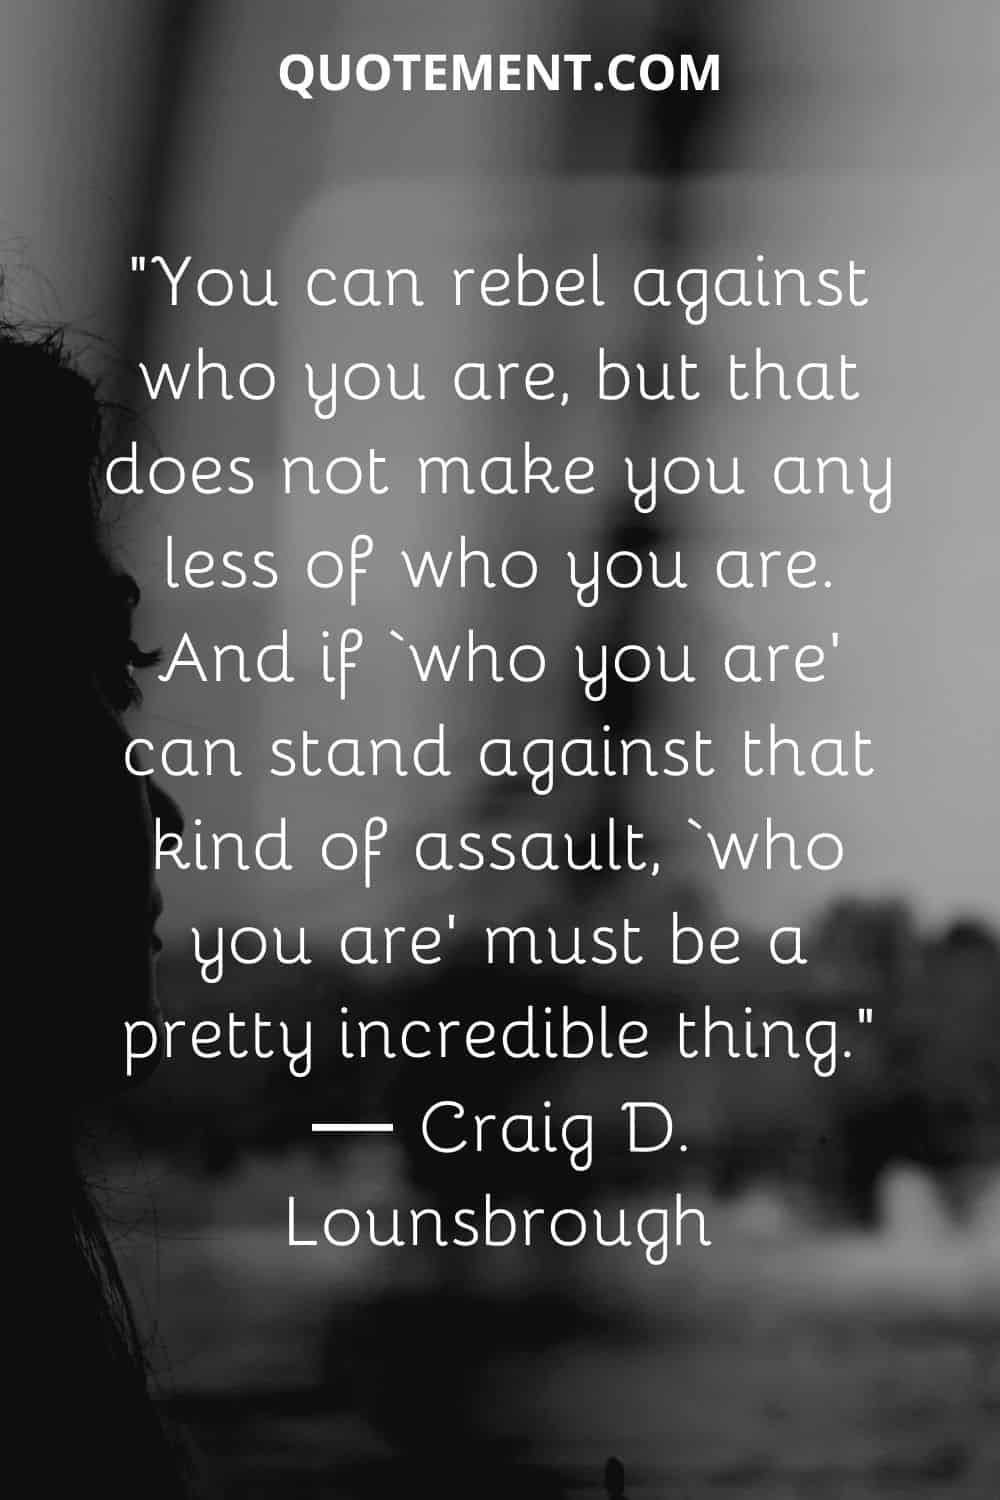 You can rebel against who you are, but that does not make you any less of who you are